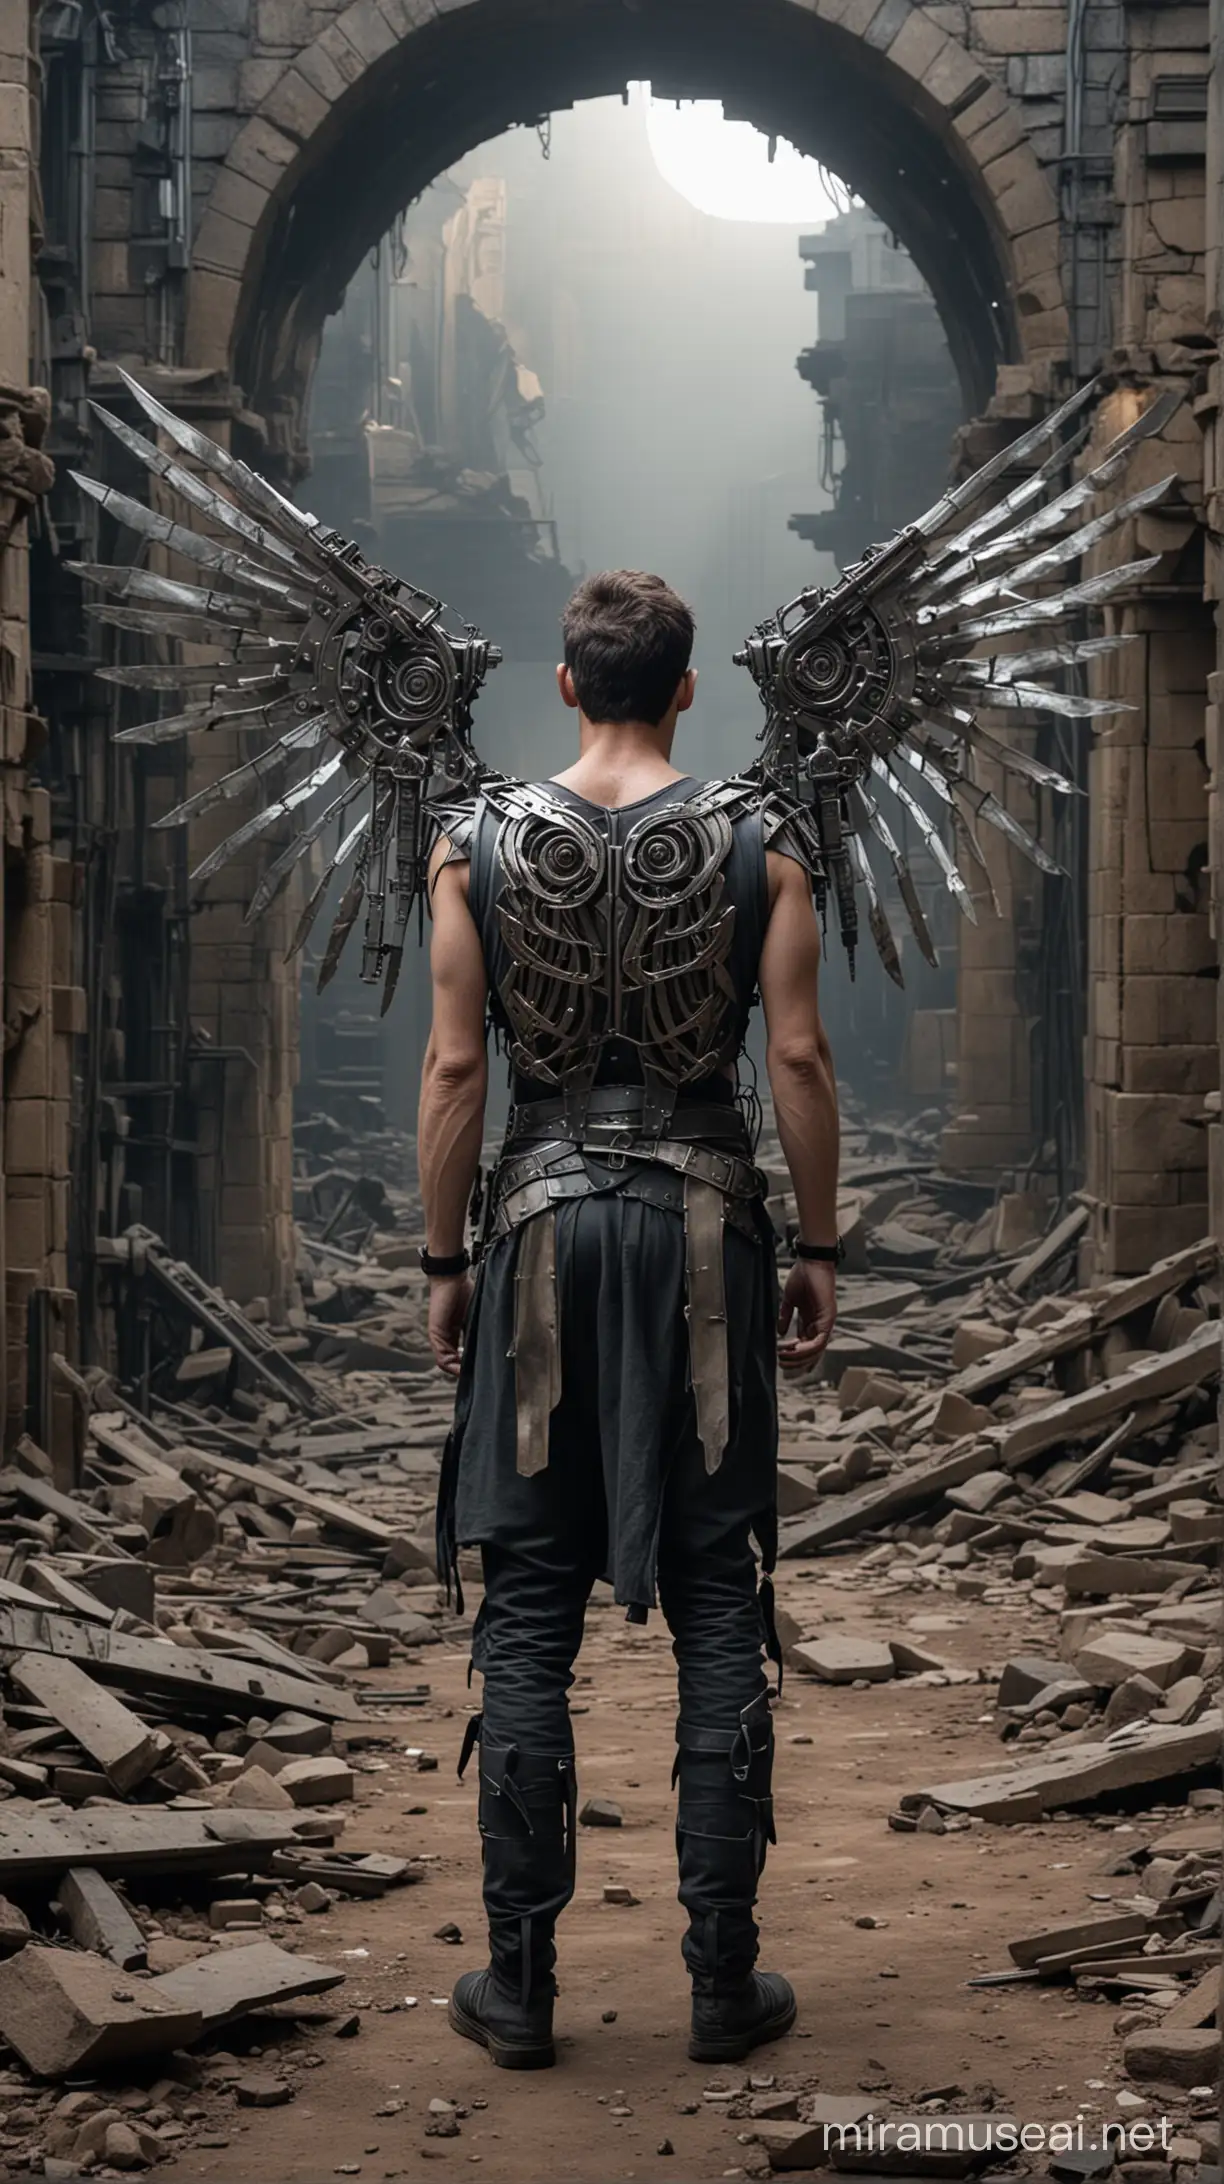 Injured Man with Mechanical Wings Stands Amid Labrynth Ruins at Night